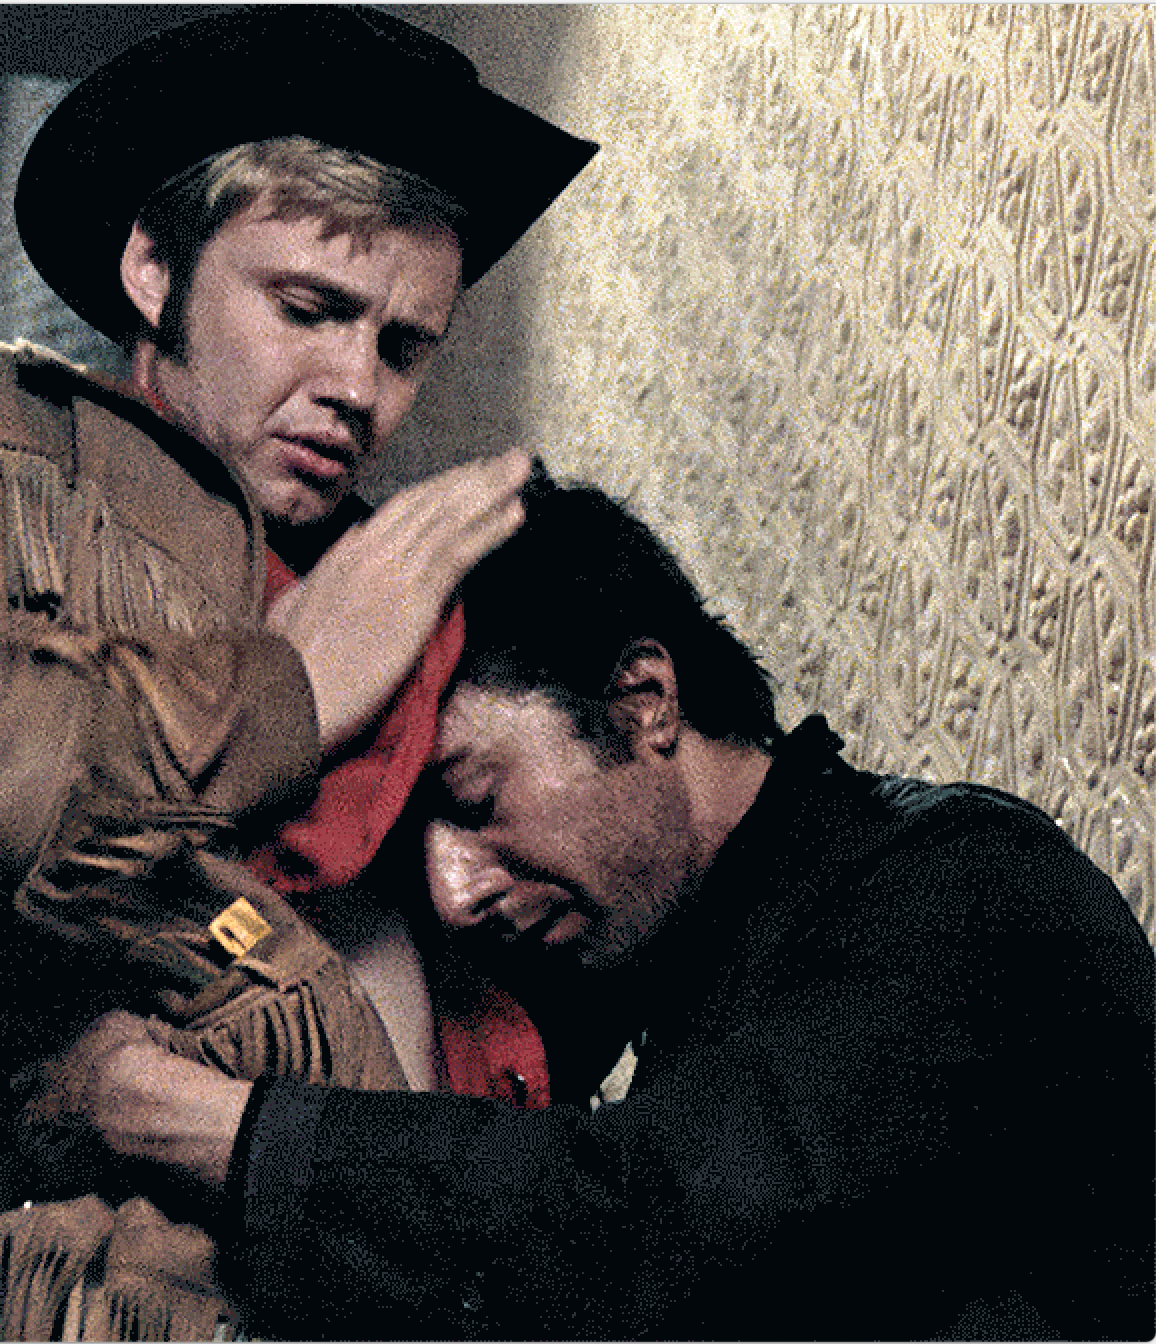 Step Mom Rape Son Strokes - Midnight Cowboy Gave Us a New Kind of Love - The Gay & Lesbian Review